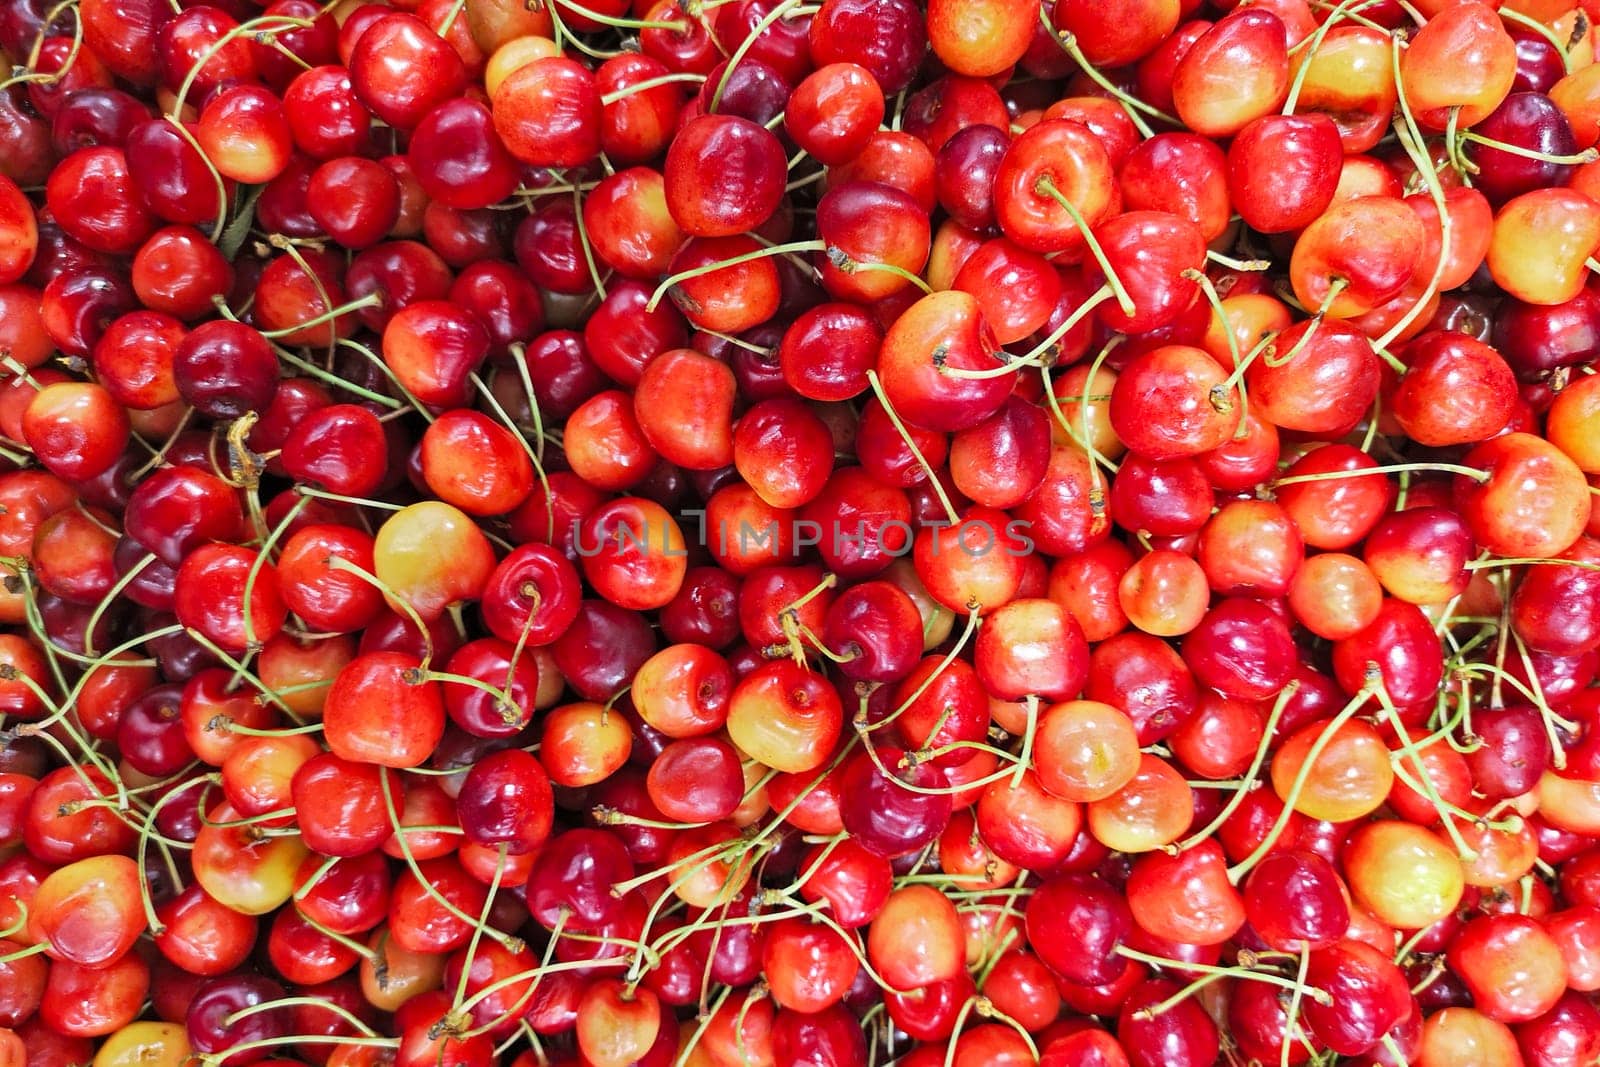 Close up of pile of ripe cherries with stalks. Large collection of fresh red cherries. Background of ripe cherries.